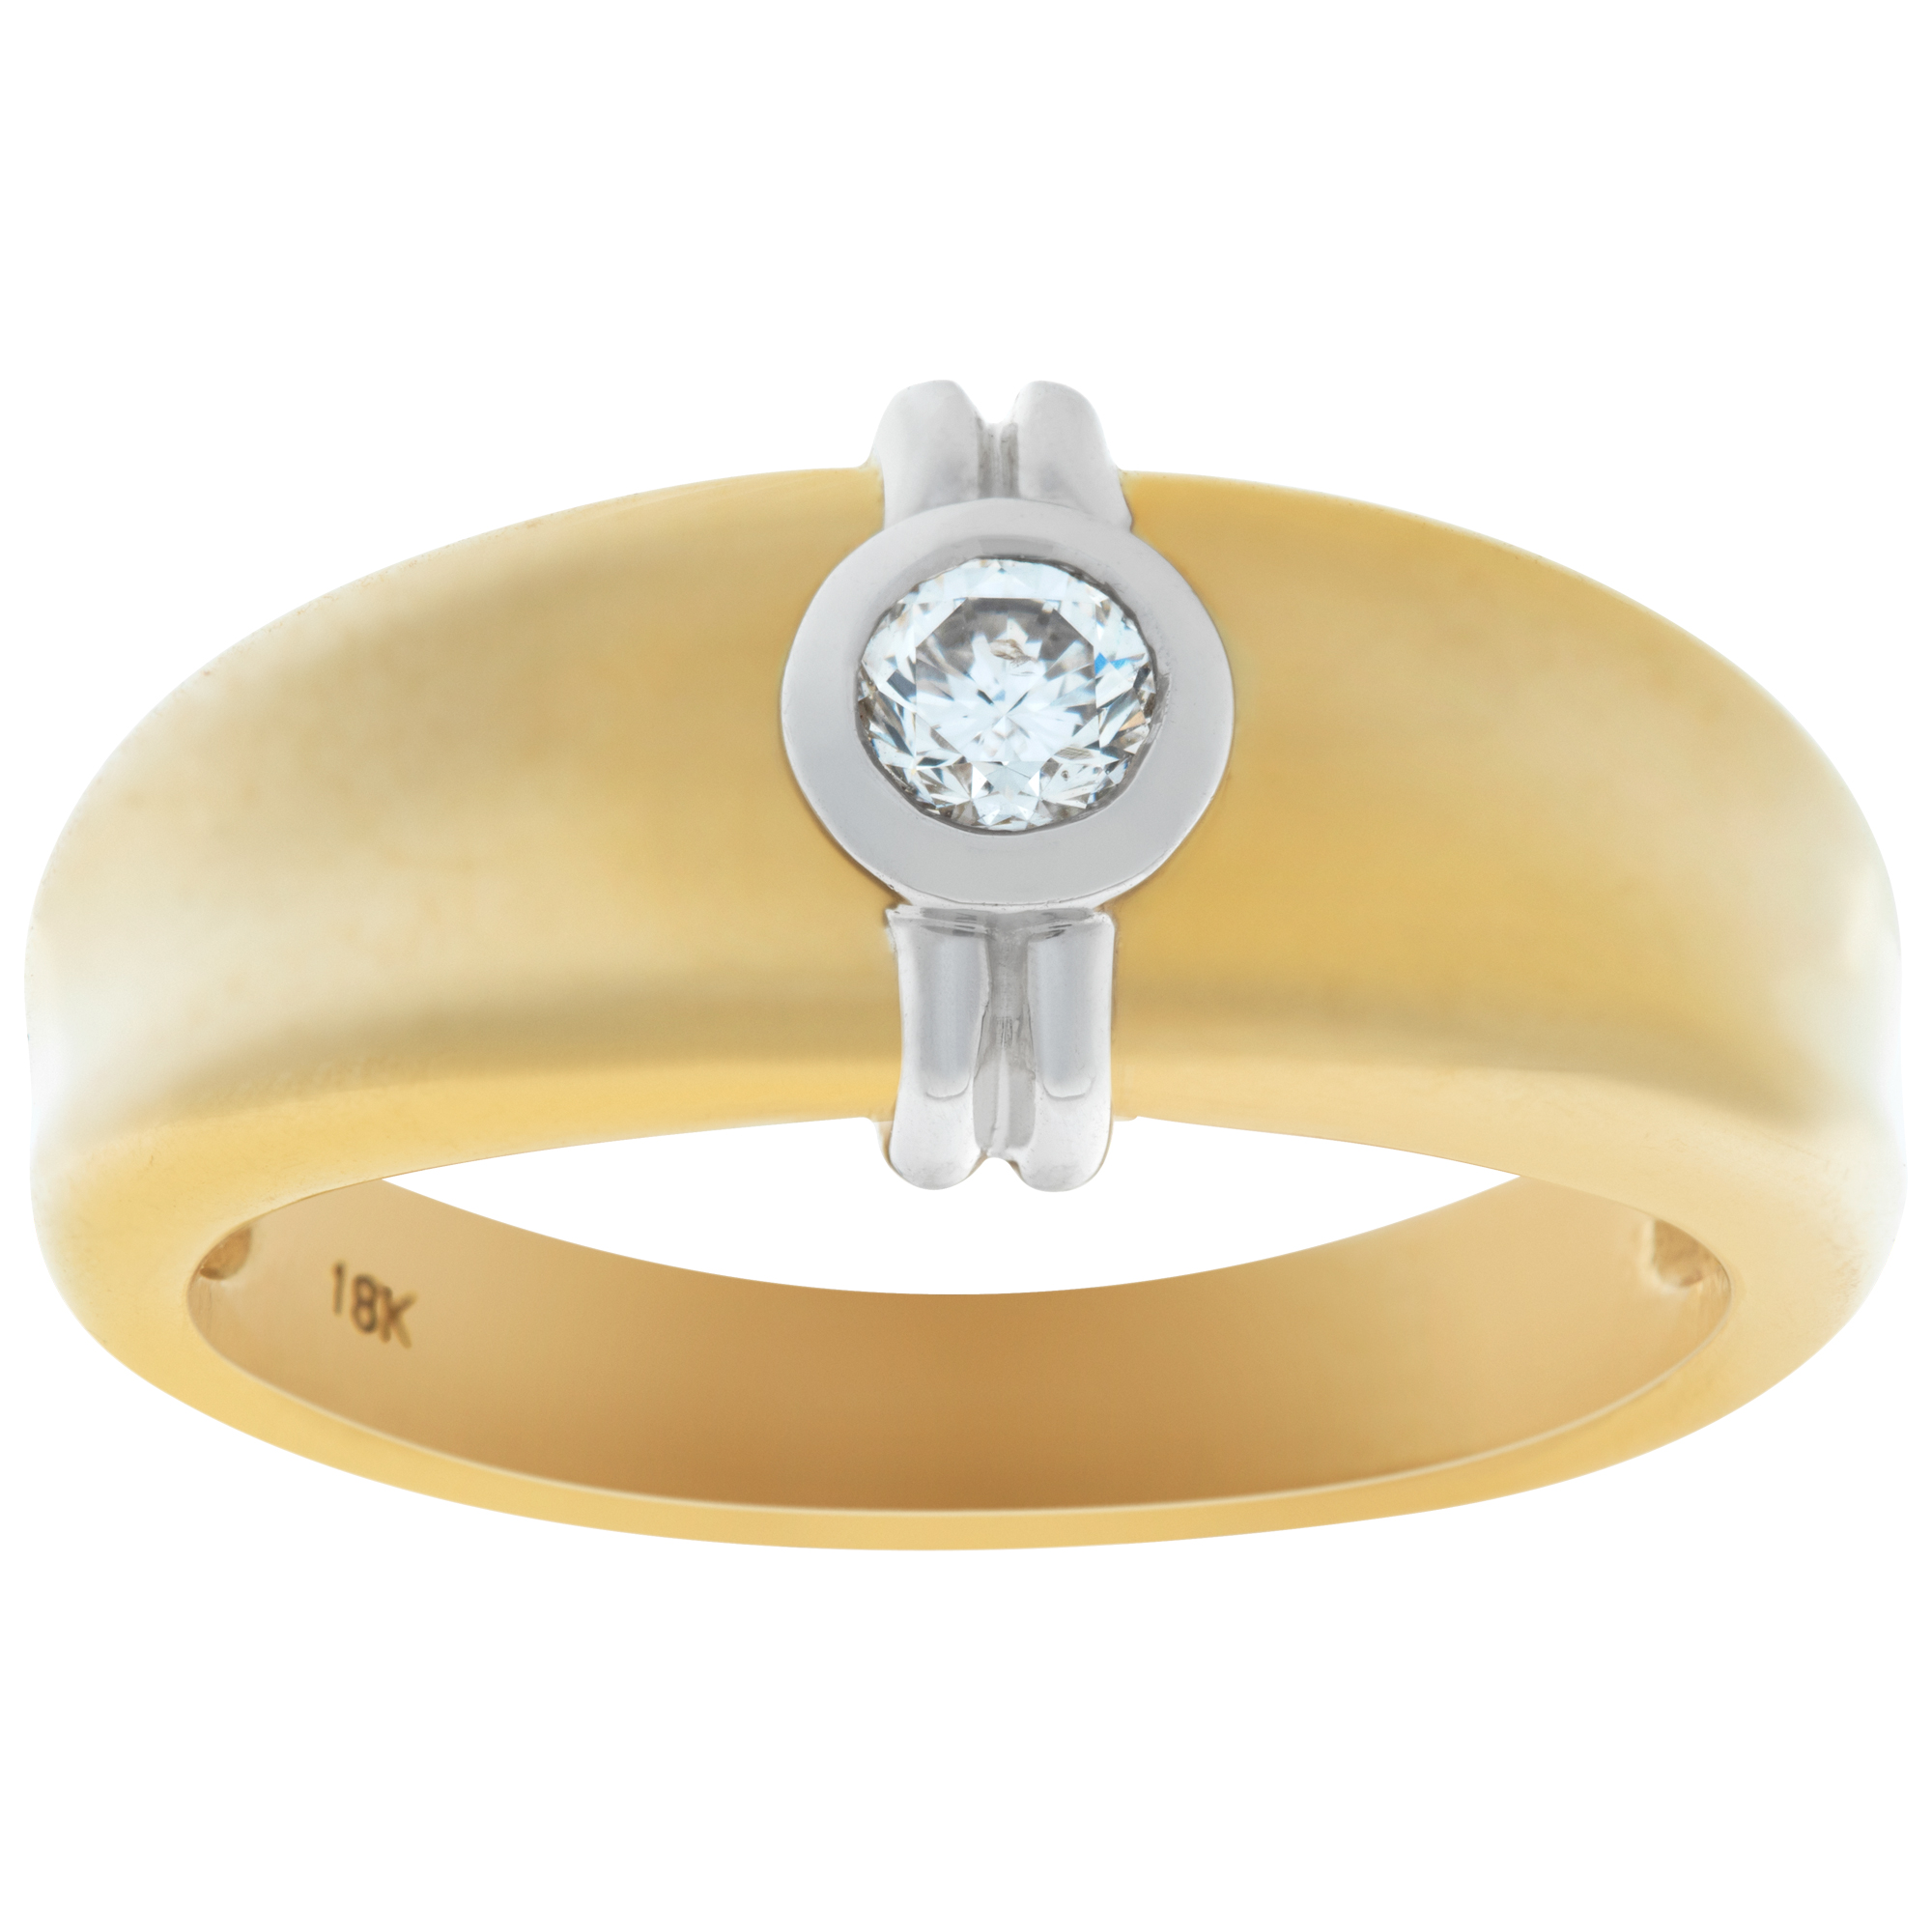 Men's ring with approx. 0.25 carat round brilliant cut center diamond in 18K yellow & white gold. Si